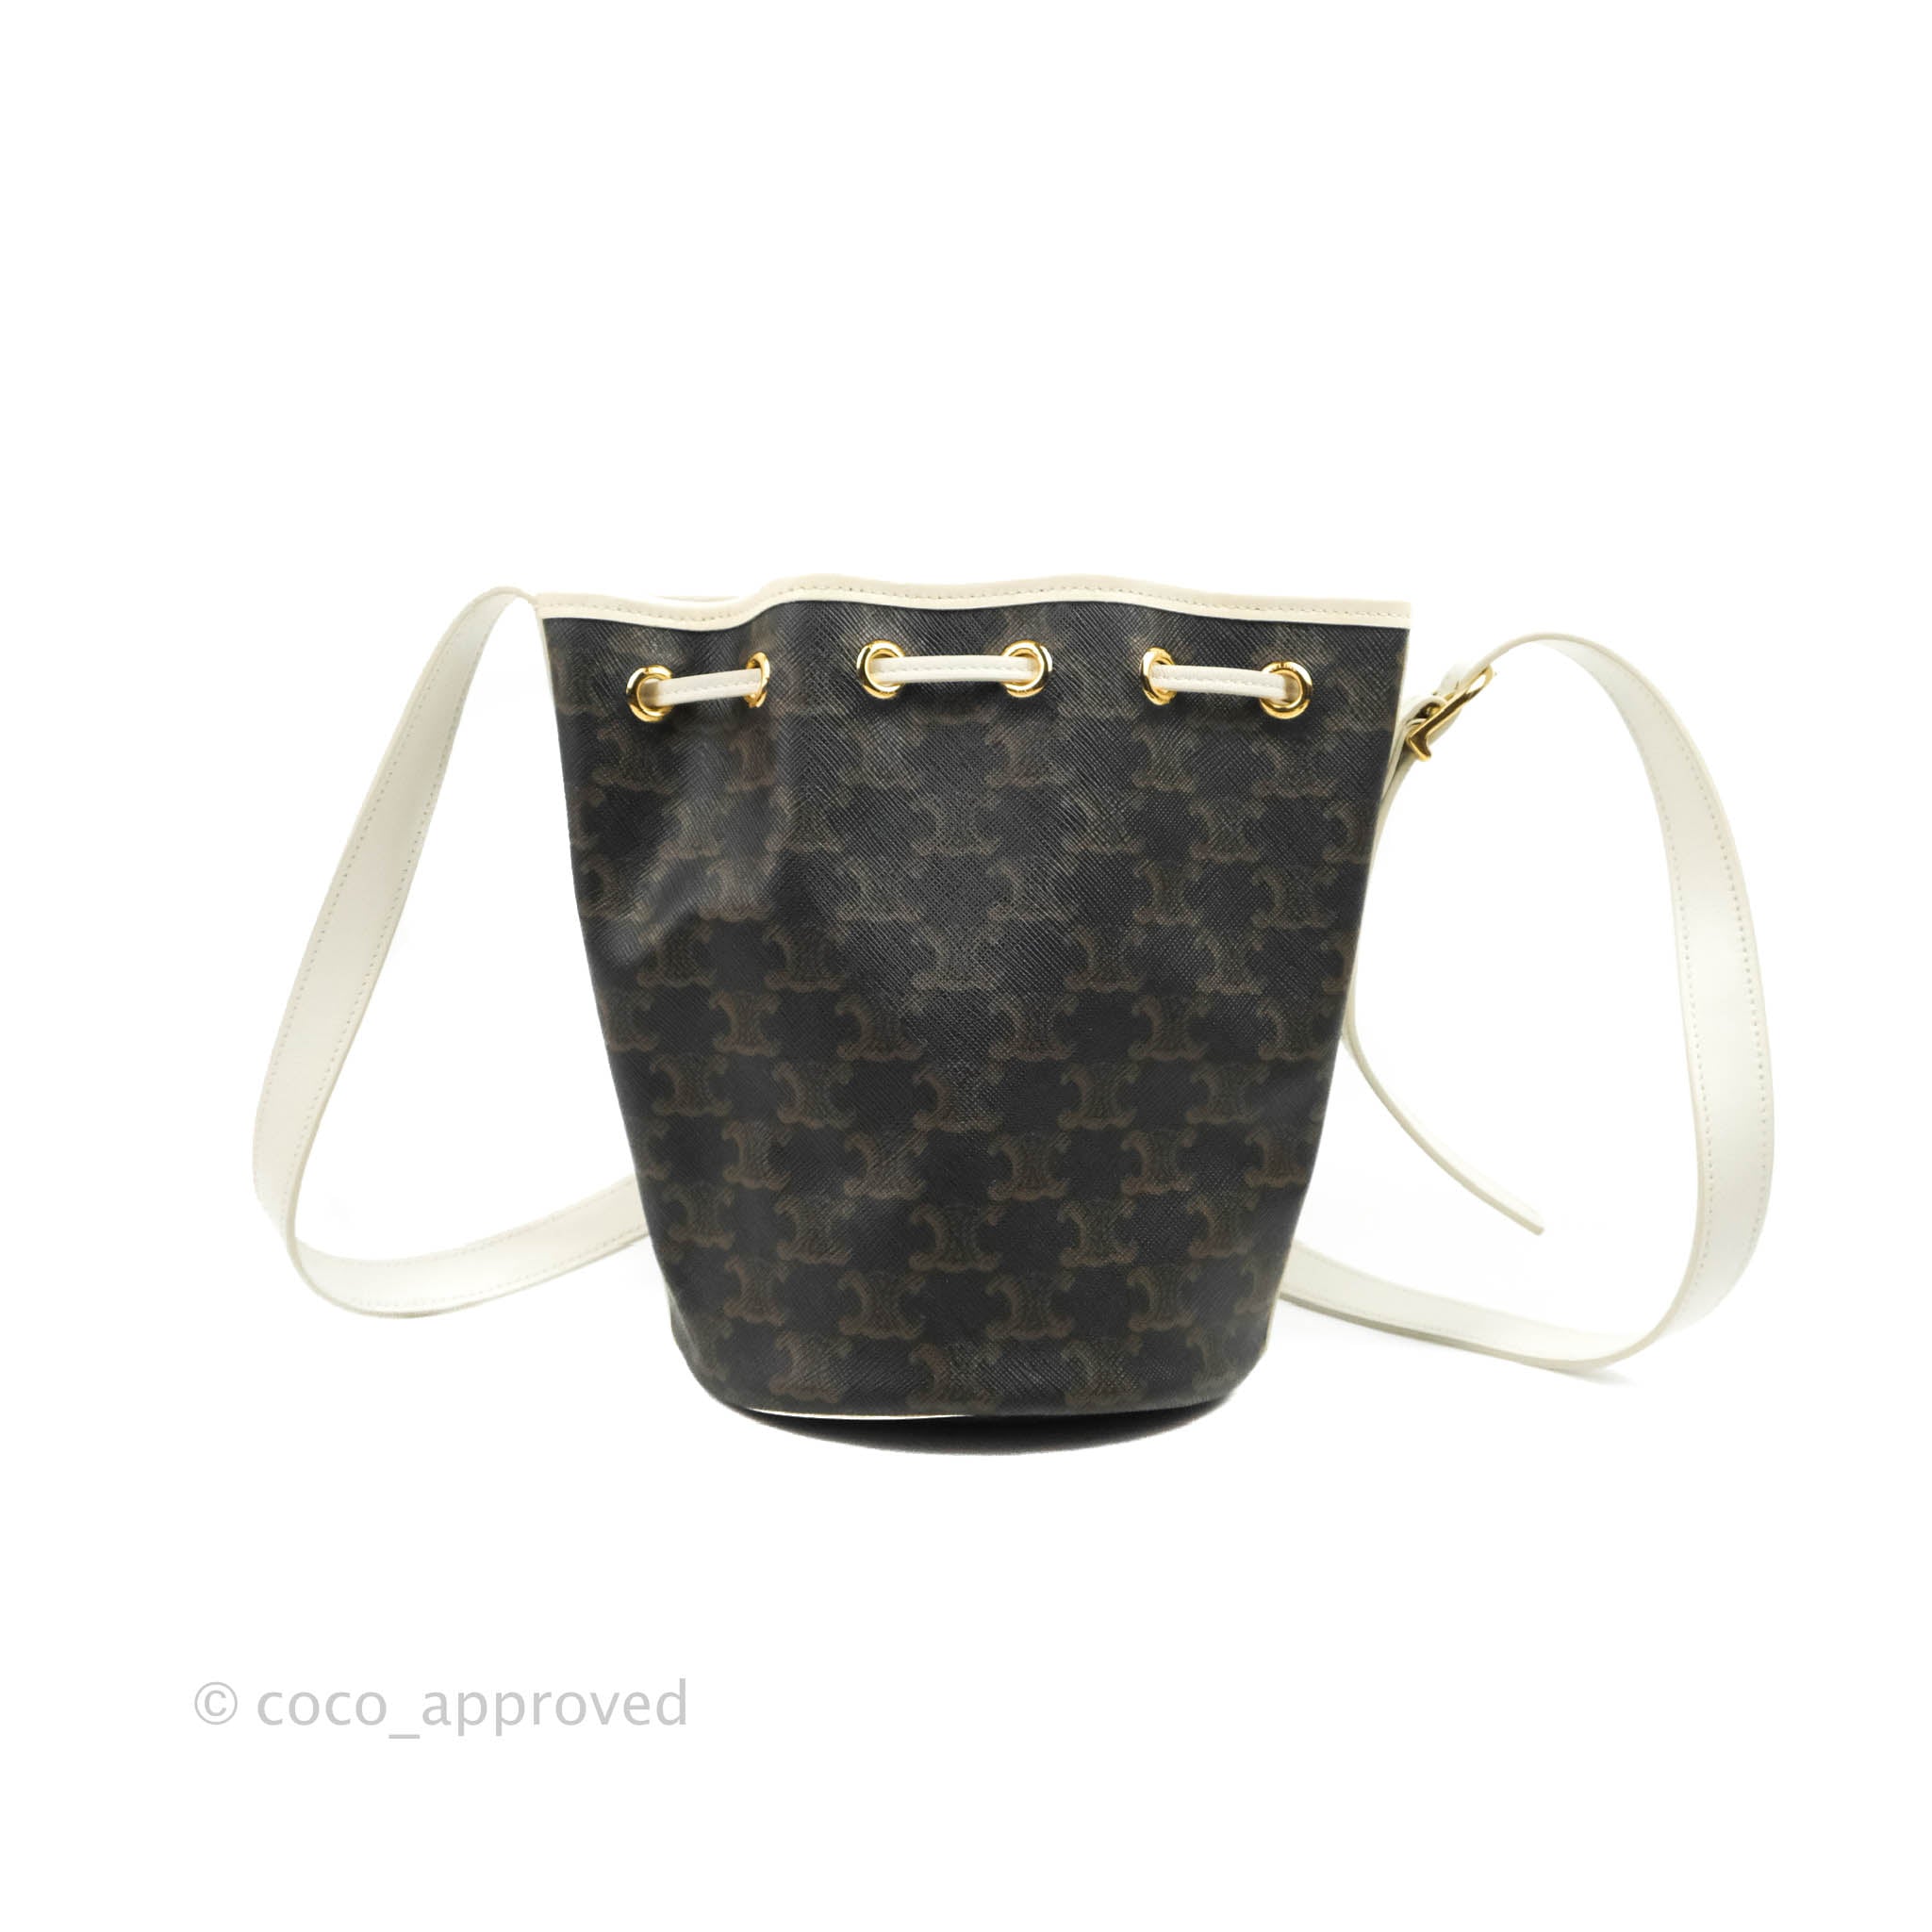 Sold at Auction: A LOUIS VUITTON WHITE TRI-COLOR DRAWSTRING BUCKET BAG